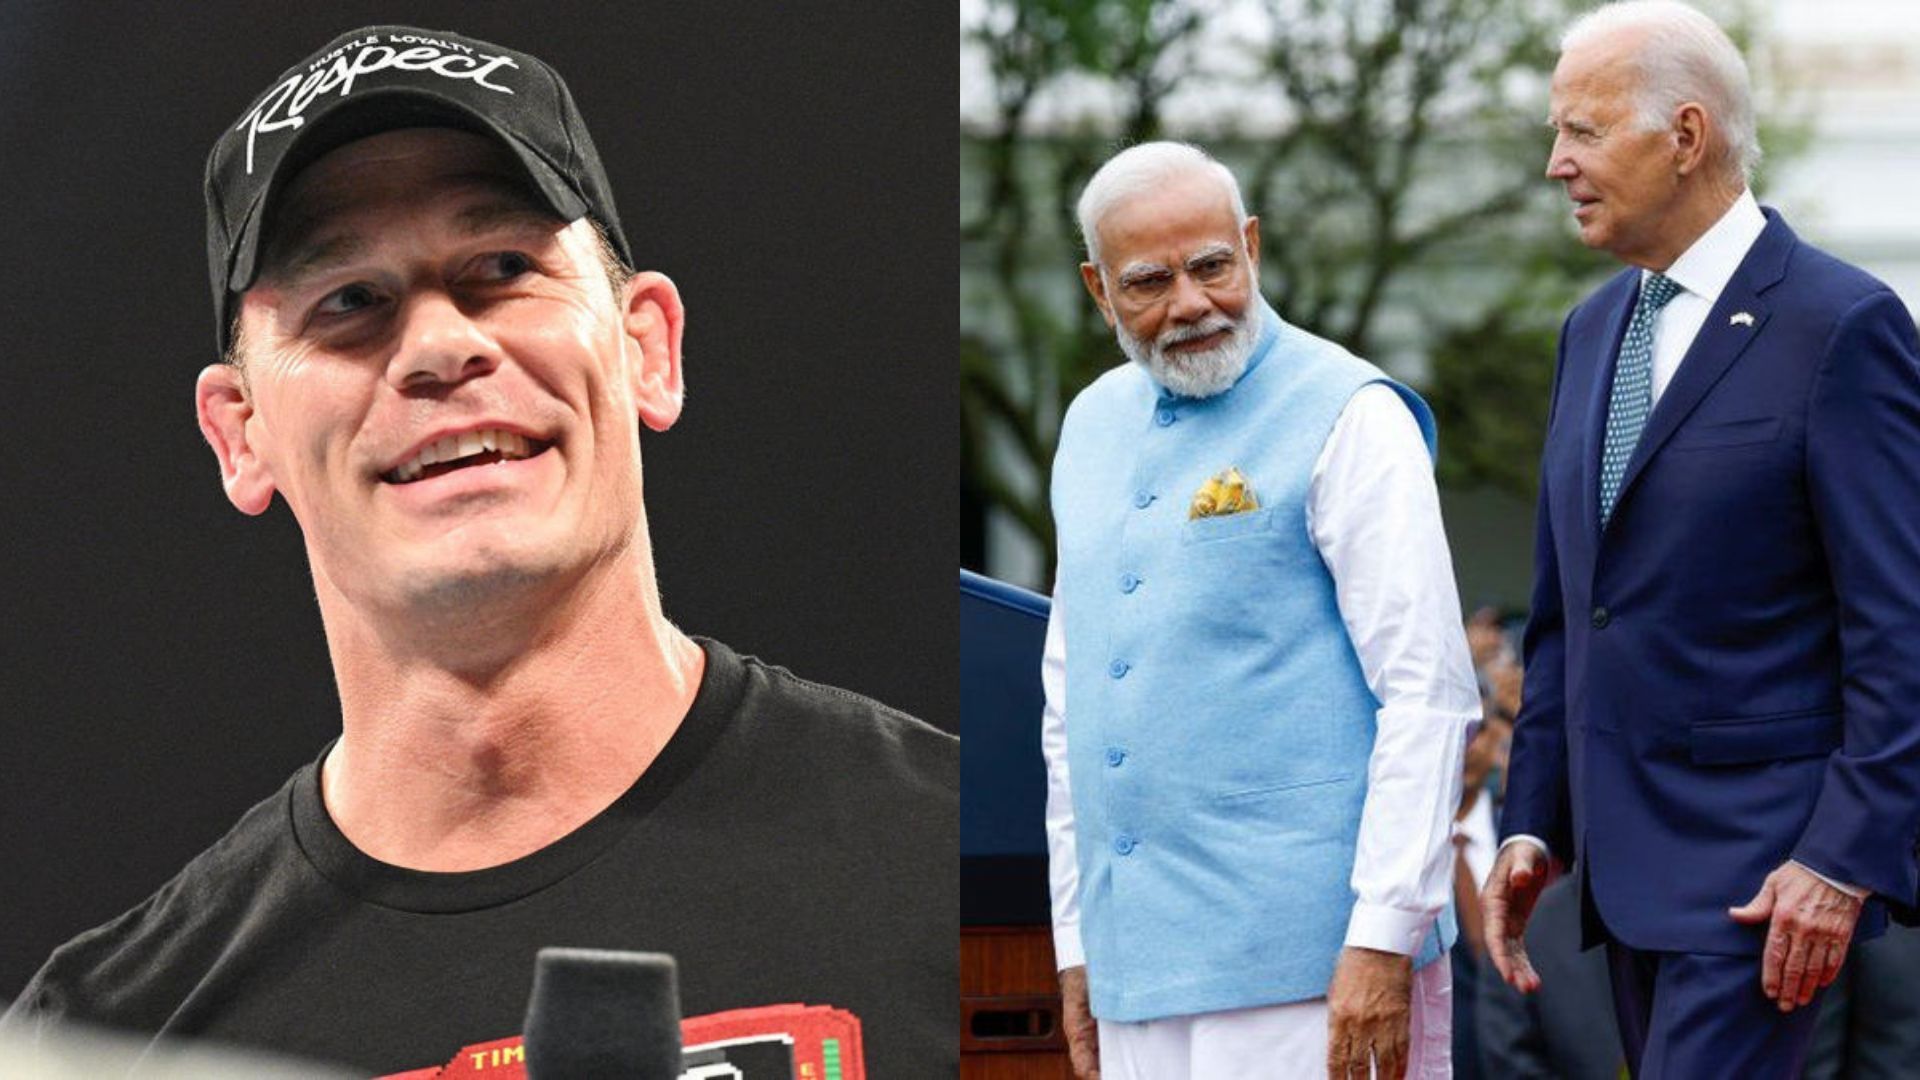 John Cena took social media by storm with his latest post